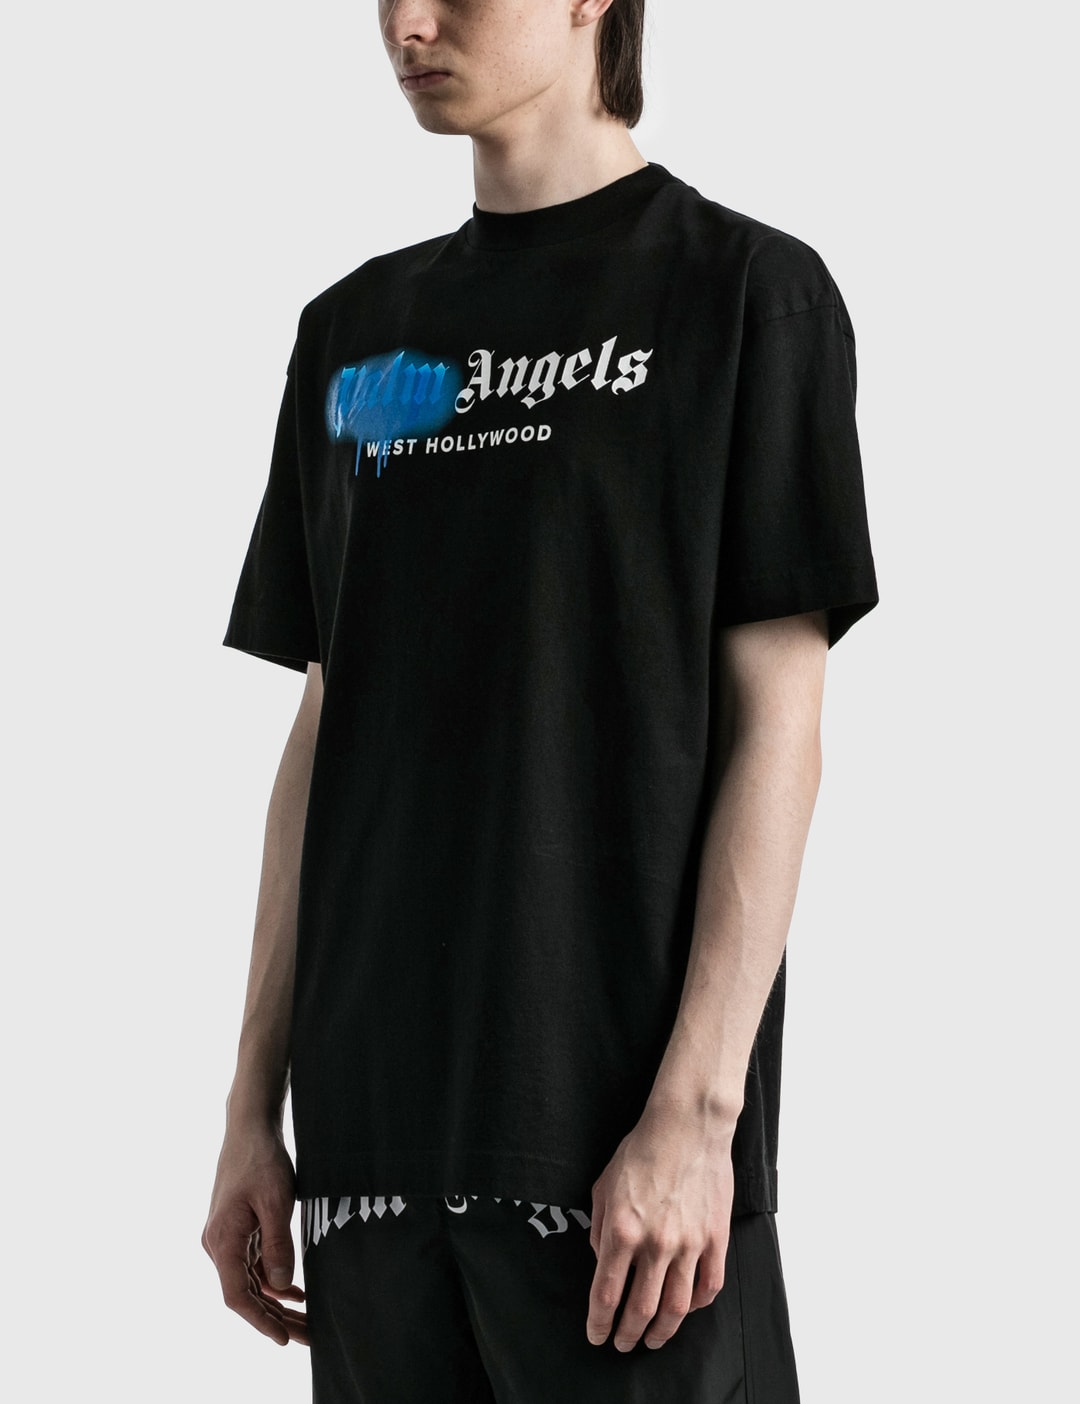 Palm Angels - West Hollywood Sprayed T-shirt | HBX - Globally Curated ...